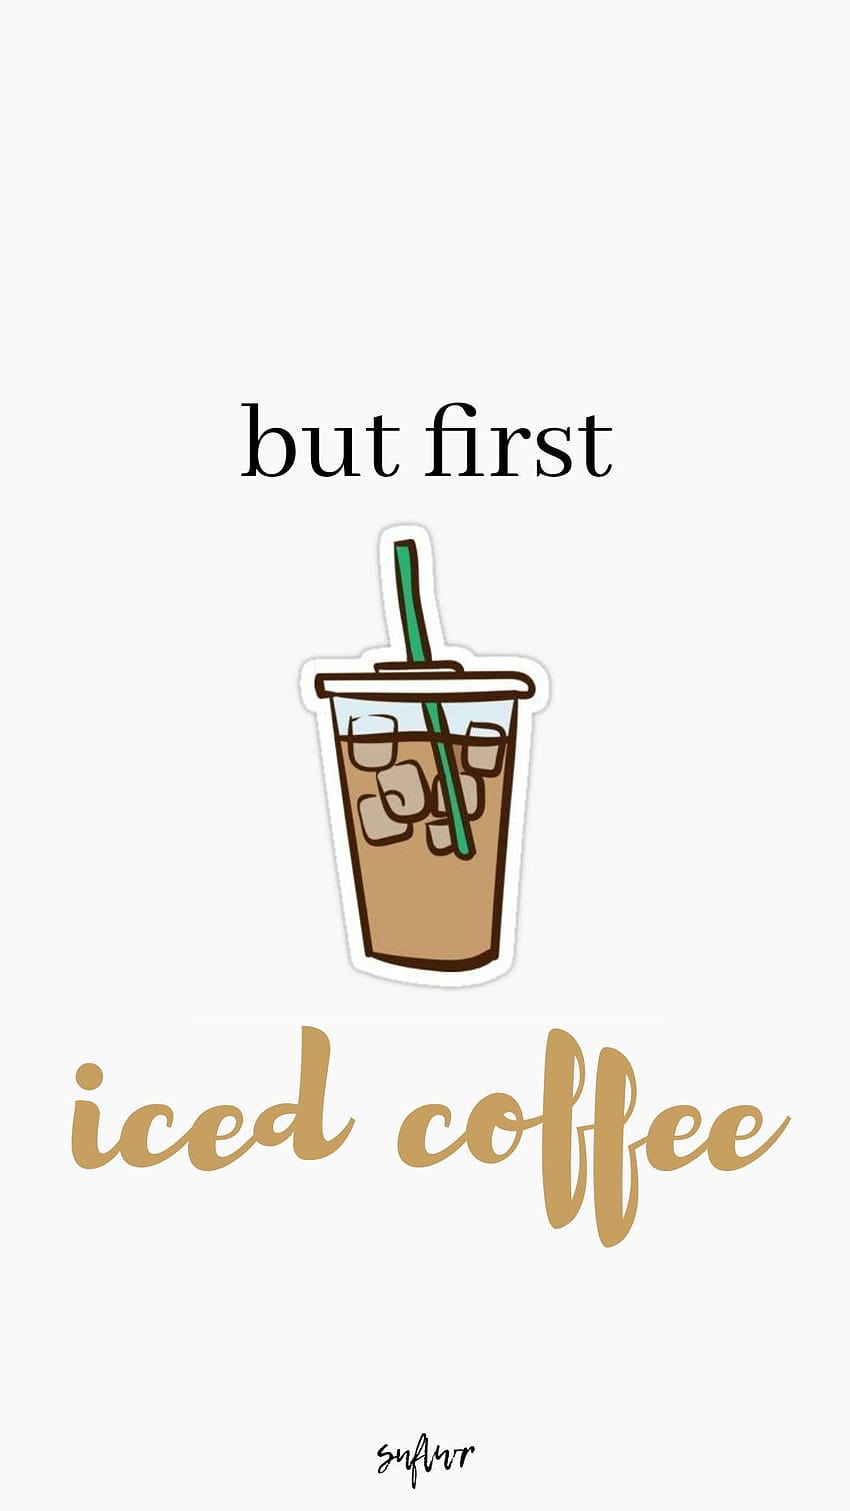 Iced Coffee Wallpaper Images  Free Download on Freepik